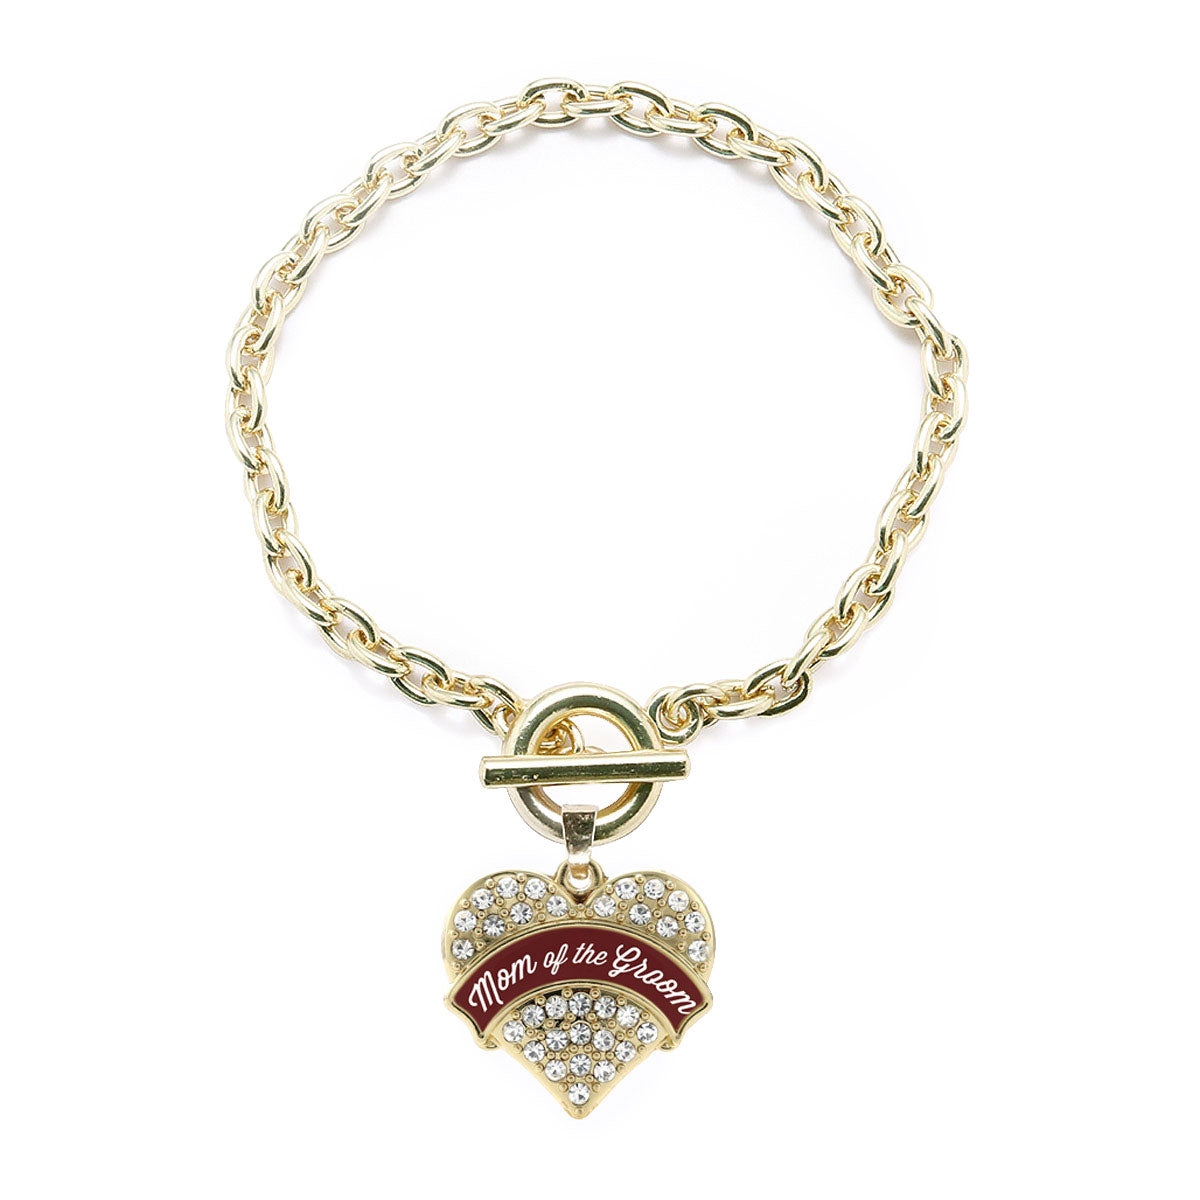 Gold Burgundy Mom of of the Groom Pave Heart Charm Toggle Bracelet